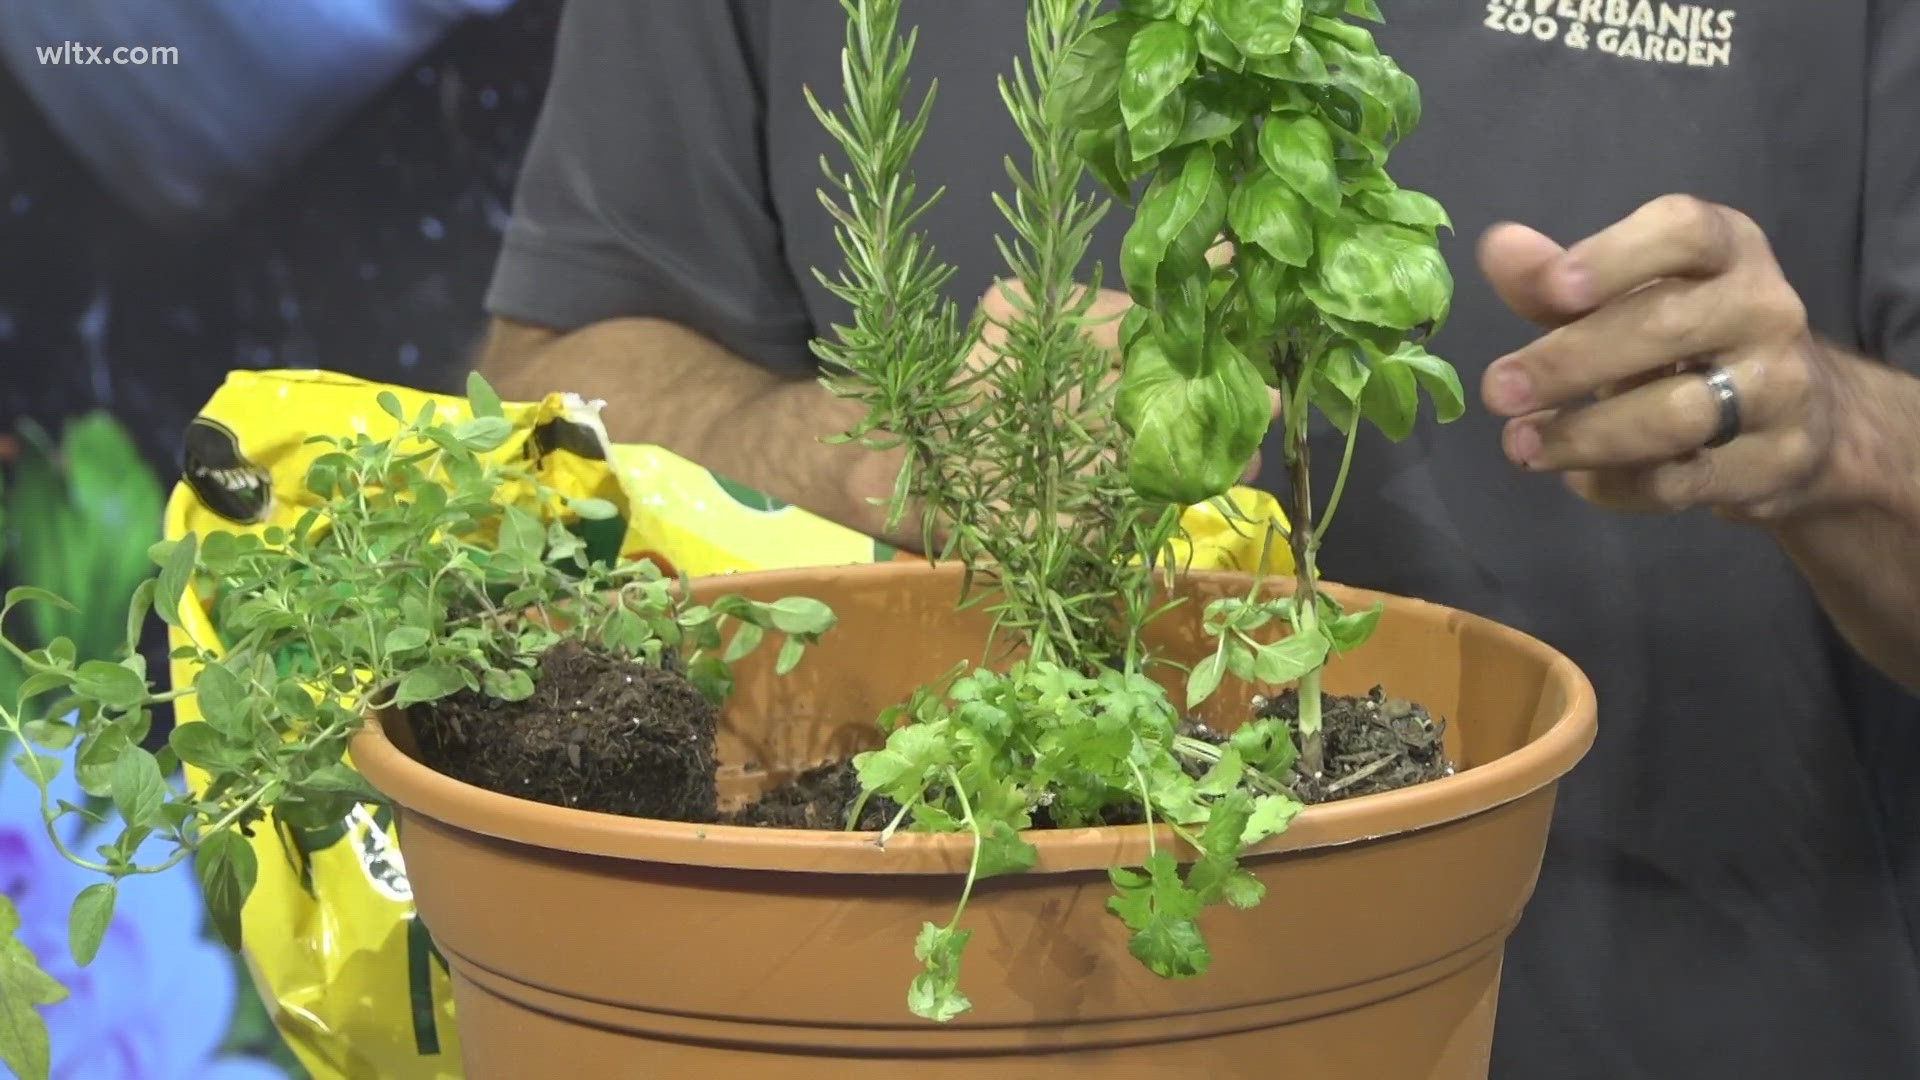 Director of Horticulture from Riverbanks Zoo and Gardens Andy Cabe explains how to grow your own herbs, in one gardening pot.